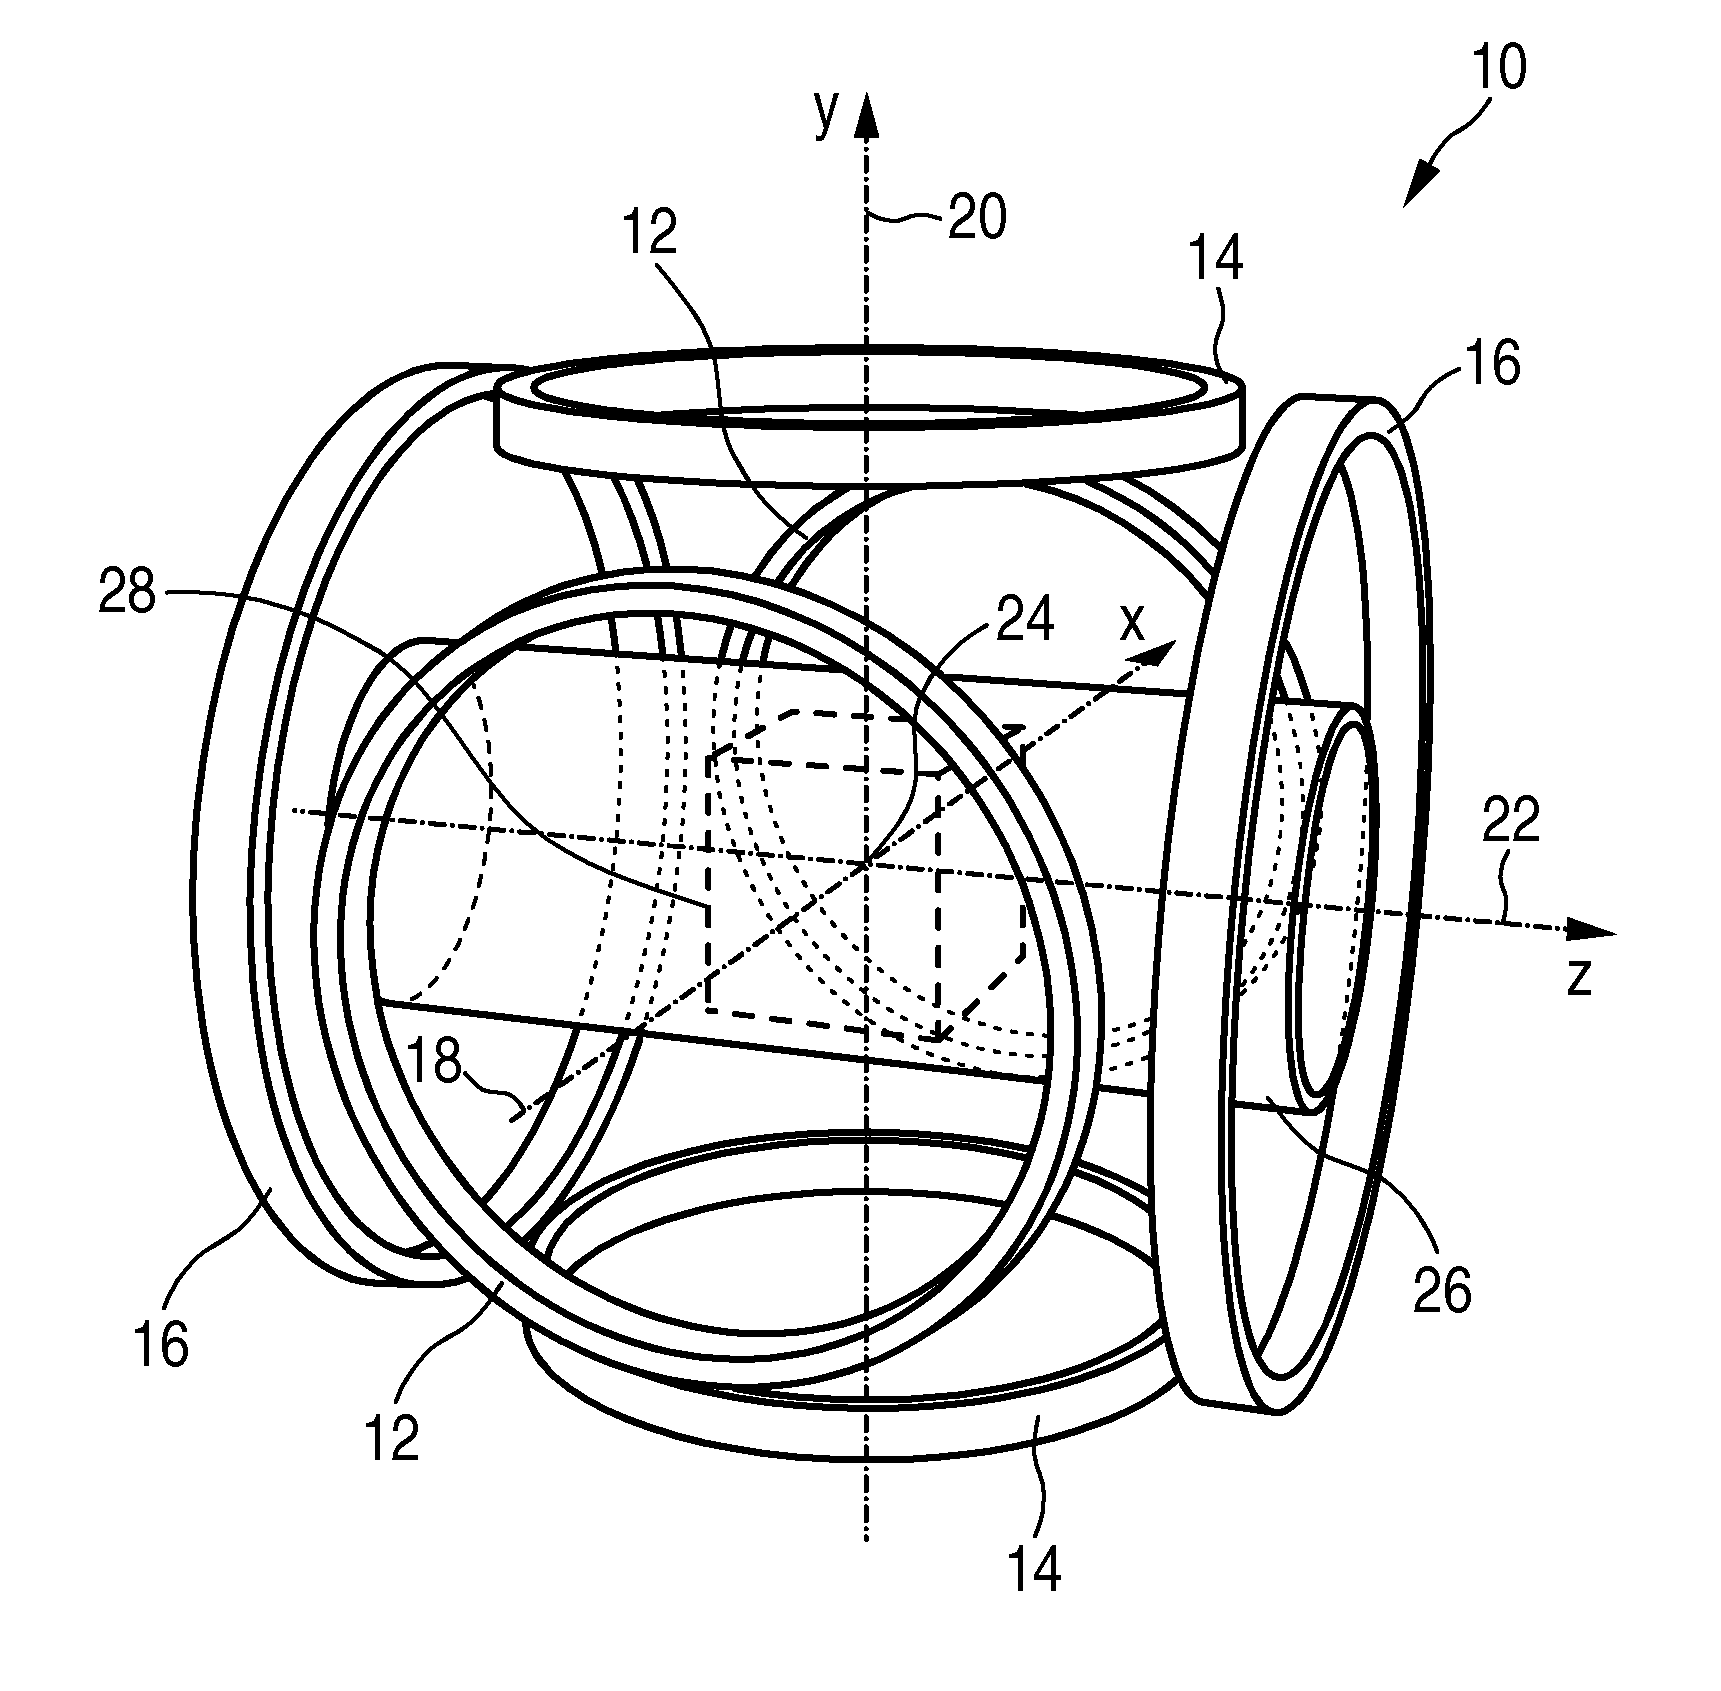 Apparatus and method for influencing and/or detecting magnetic particles